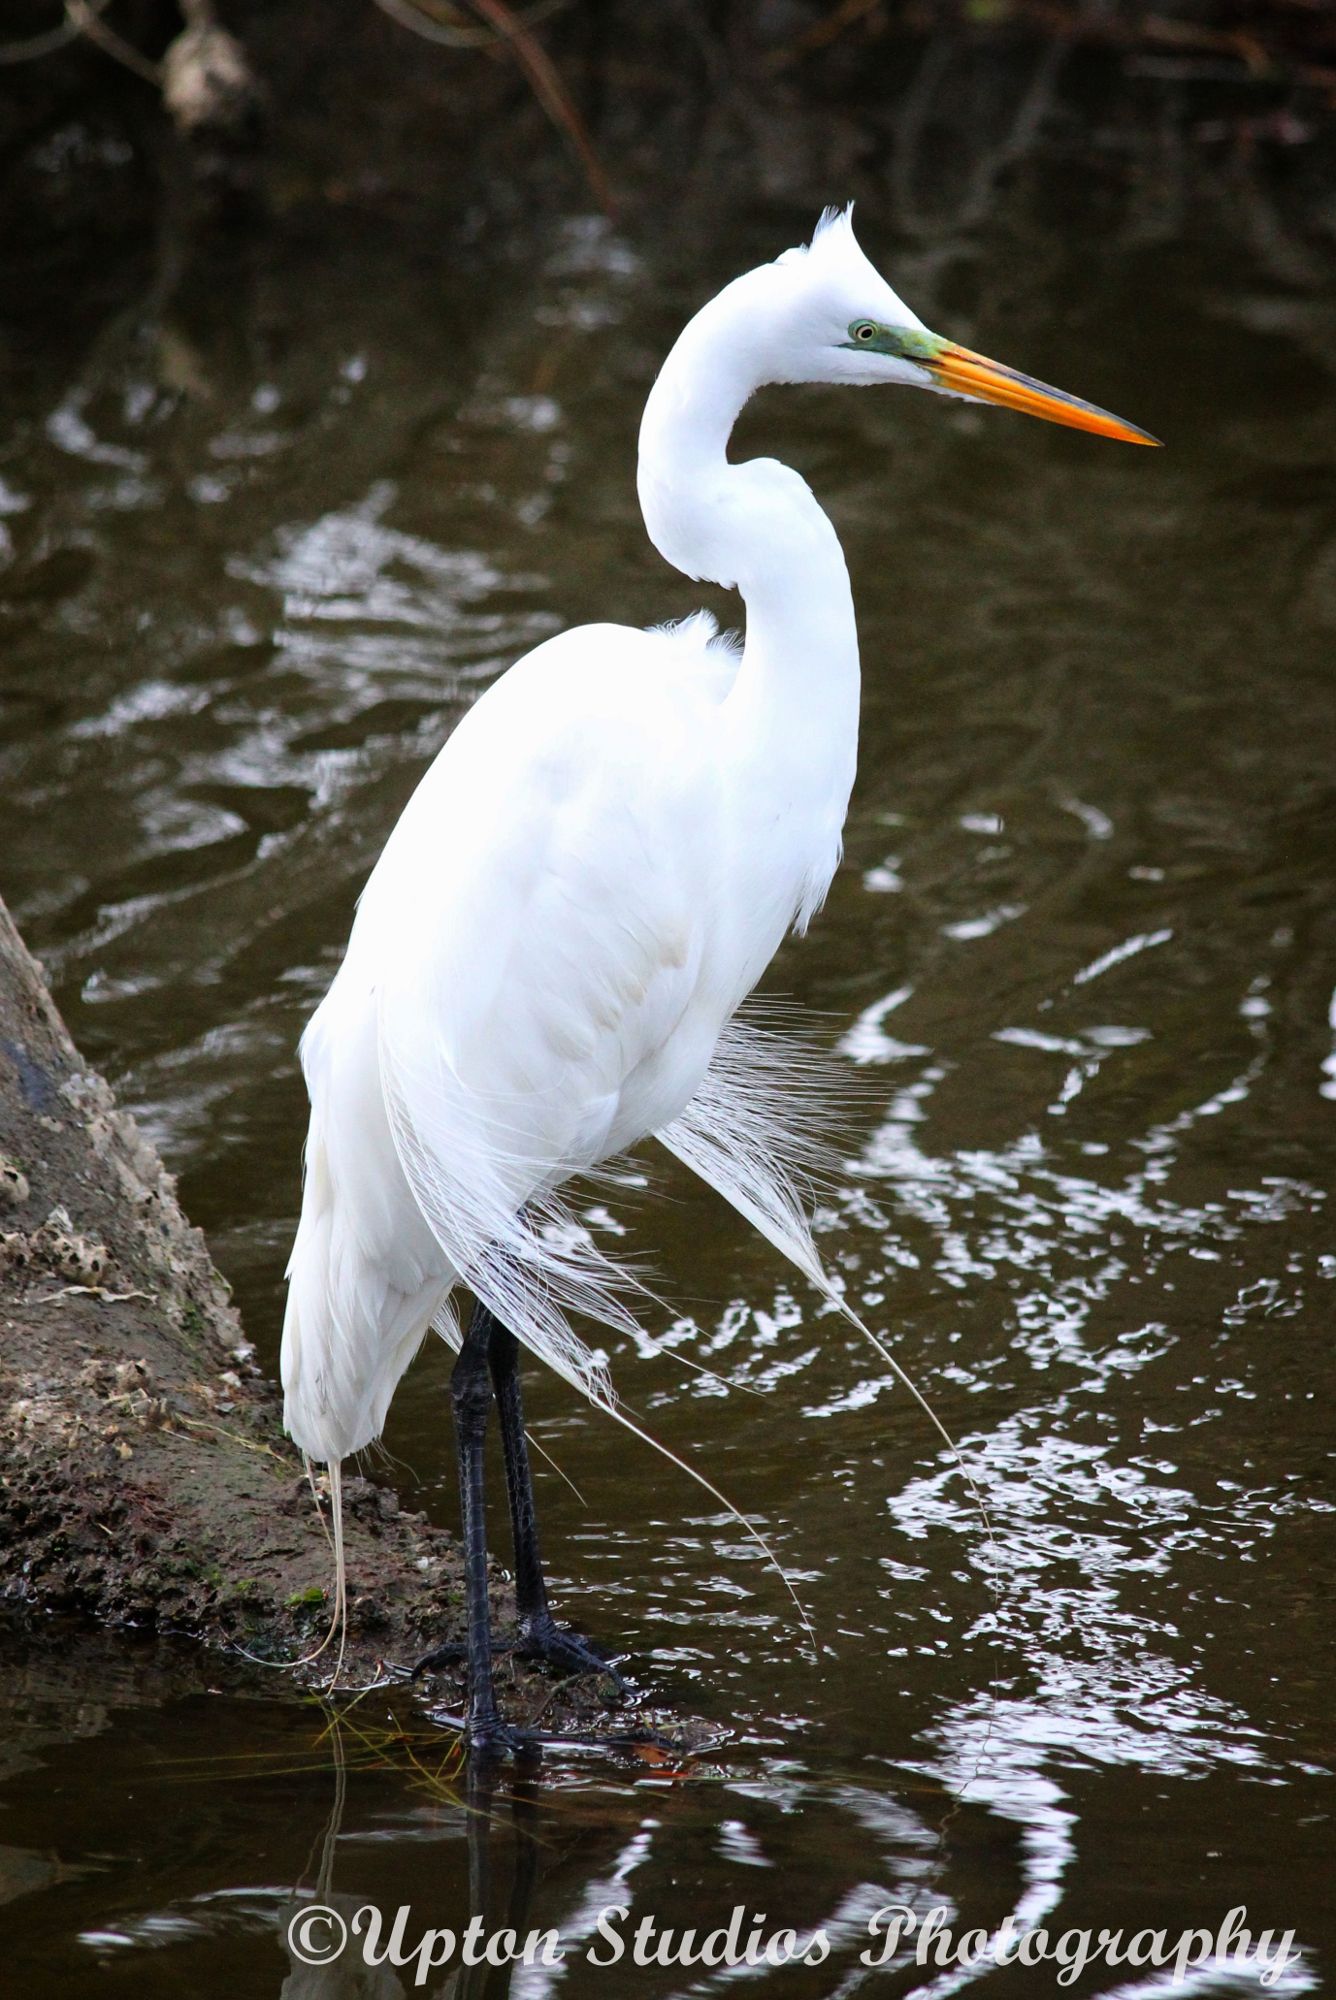 The Snowy Egret A Symbolic Transition — Steemit